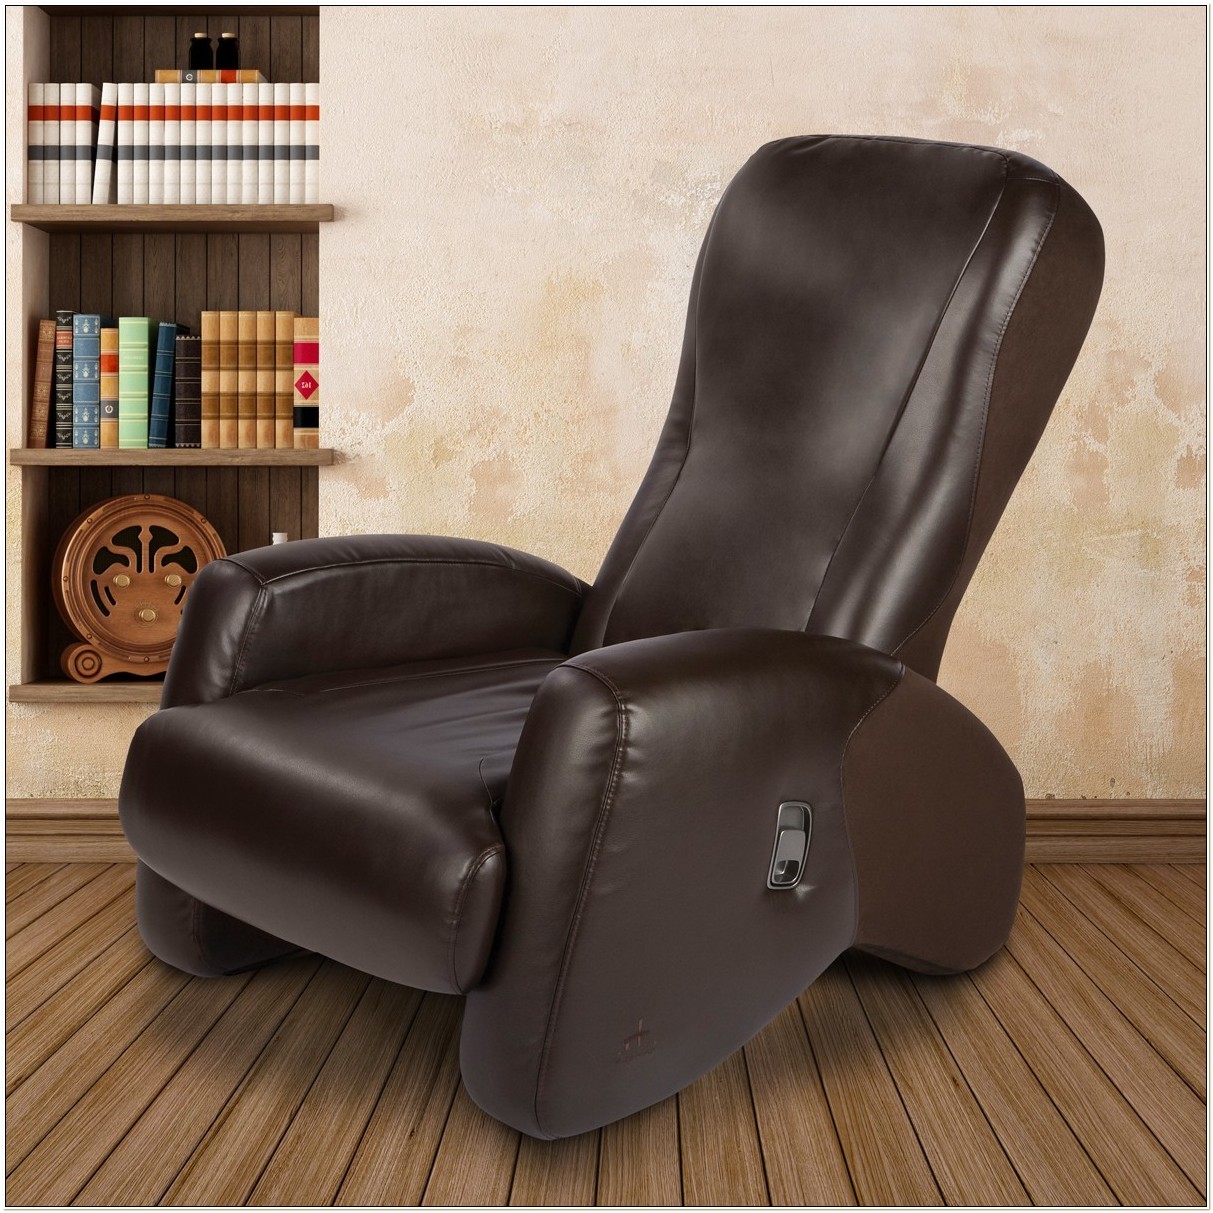 Human Touch Ijoy Massage Chair 2310 - Chairs : Home Decorating Ideas #